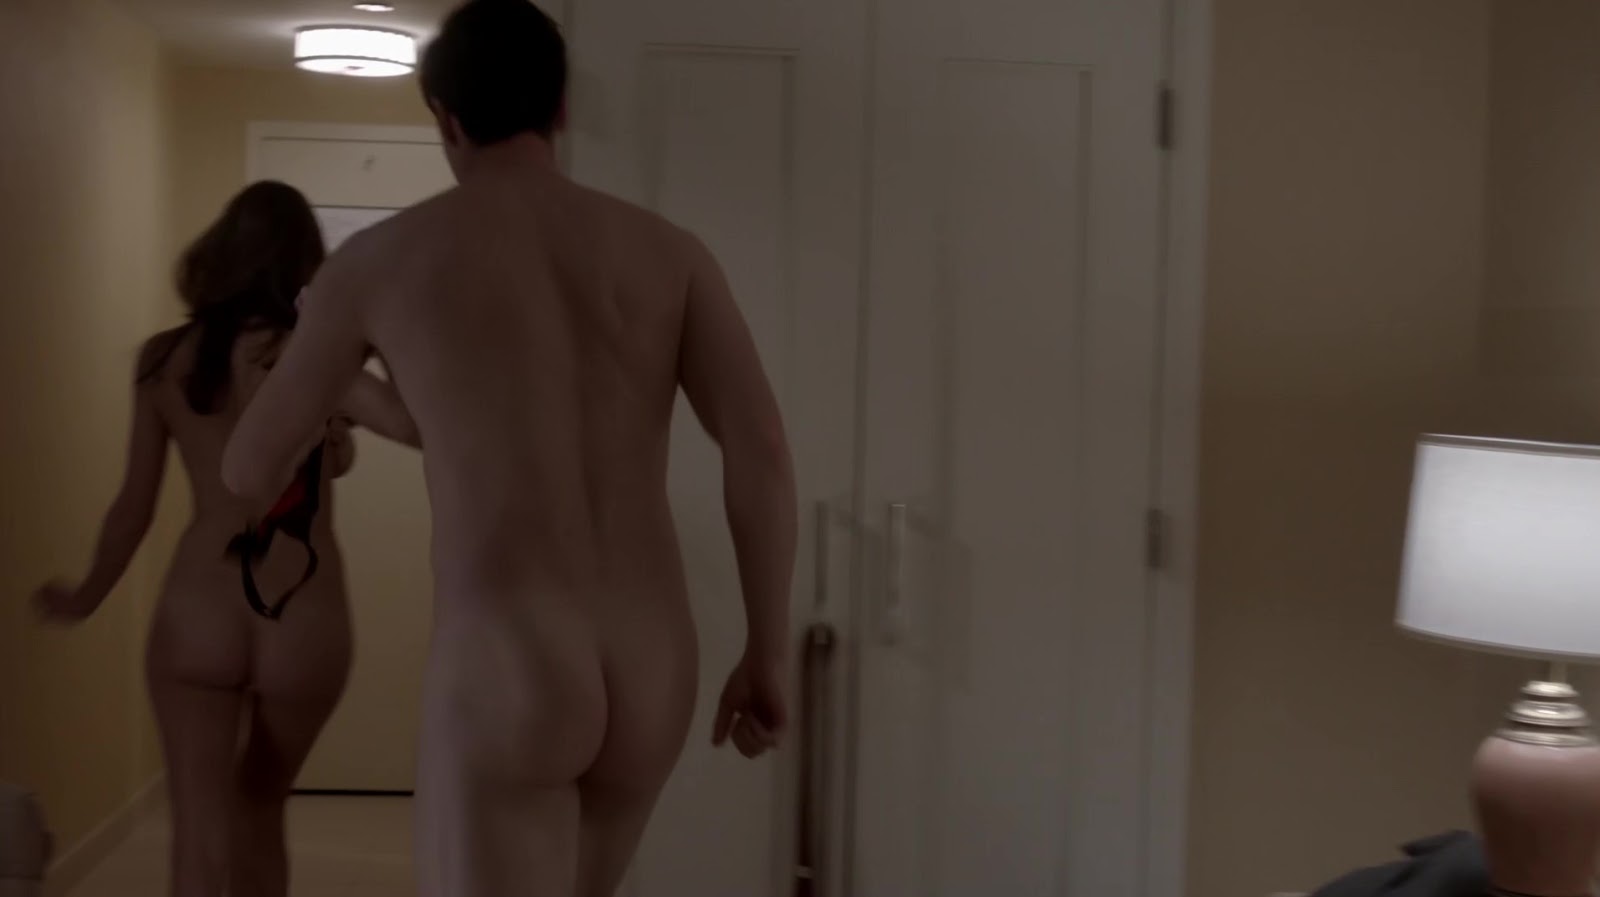 Ryan Farrell nude in The Americans 1-08 "Mutually Assured Destruction&...